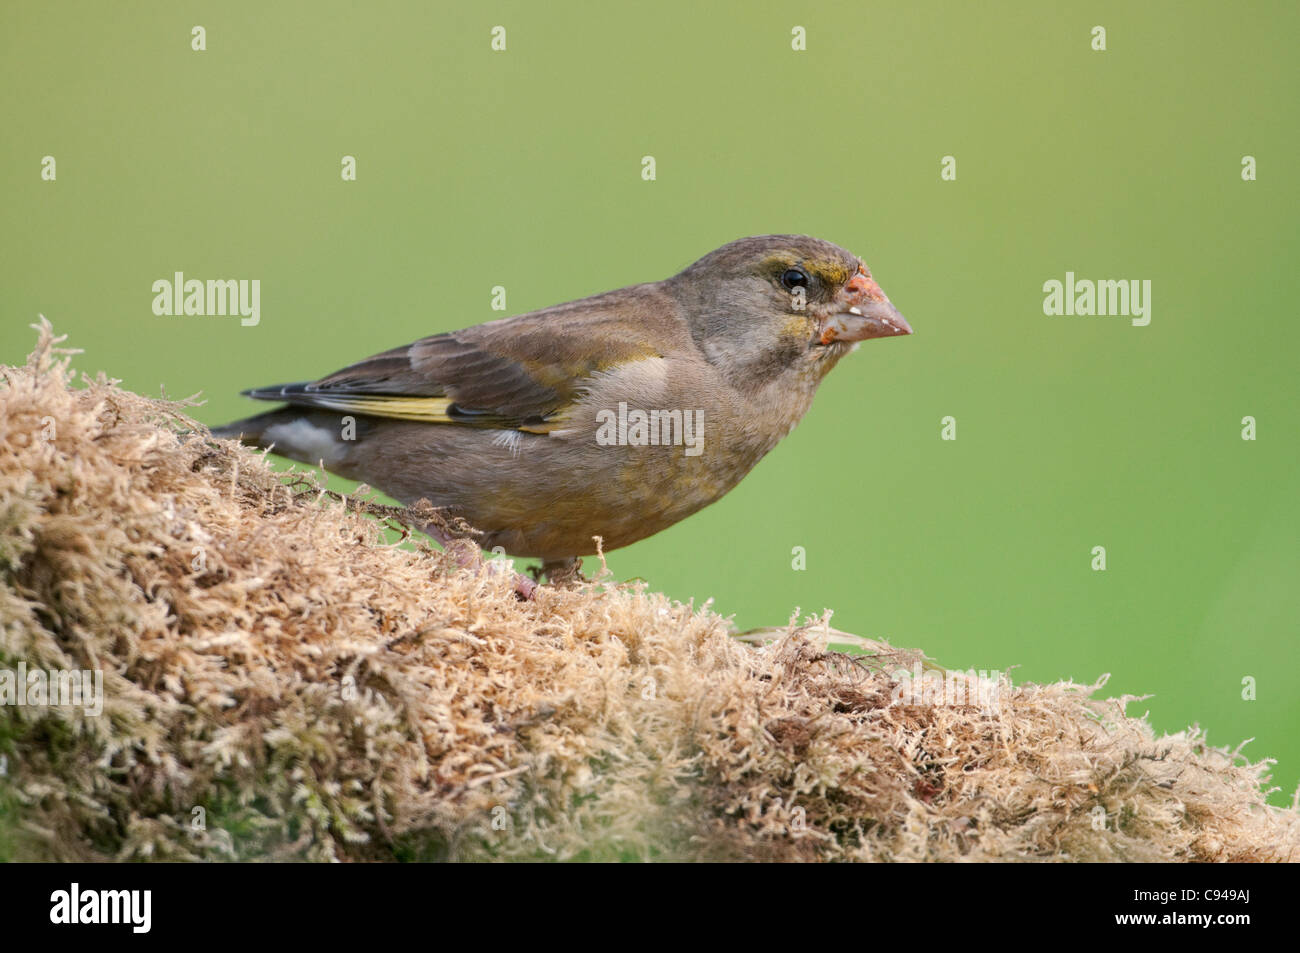 Greenfinch close up perched on a moss covered log Stock Photo